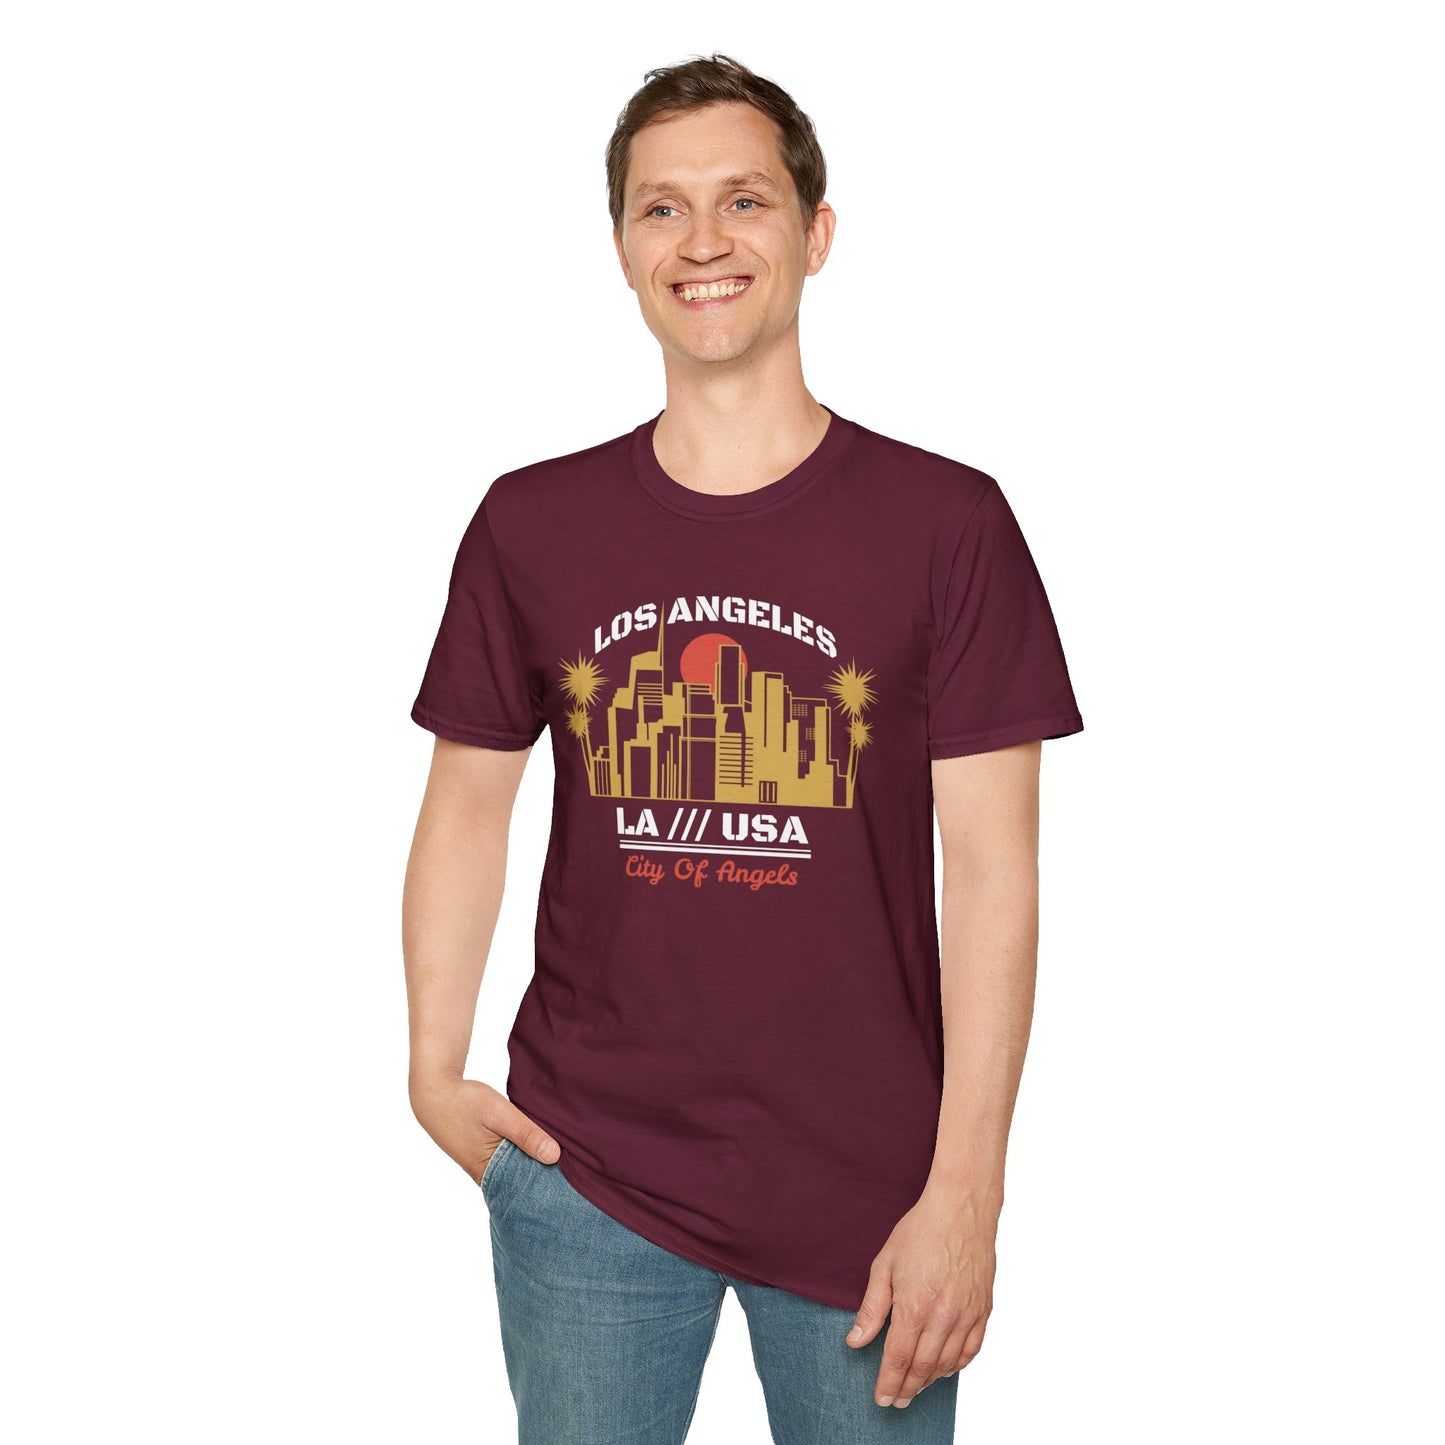 Discover LA Vibes: Stylish and Comfortable Los Angeles Graphic Tee for Trendsetters